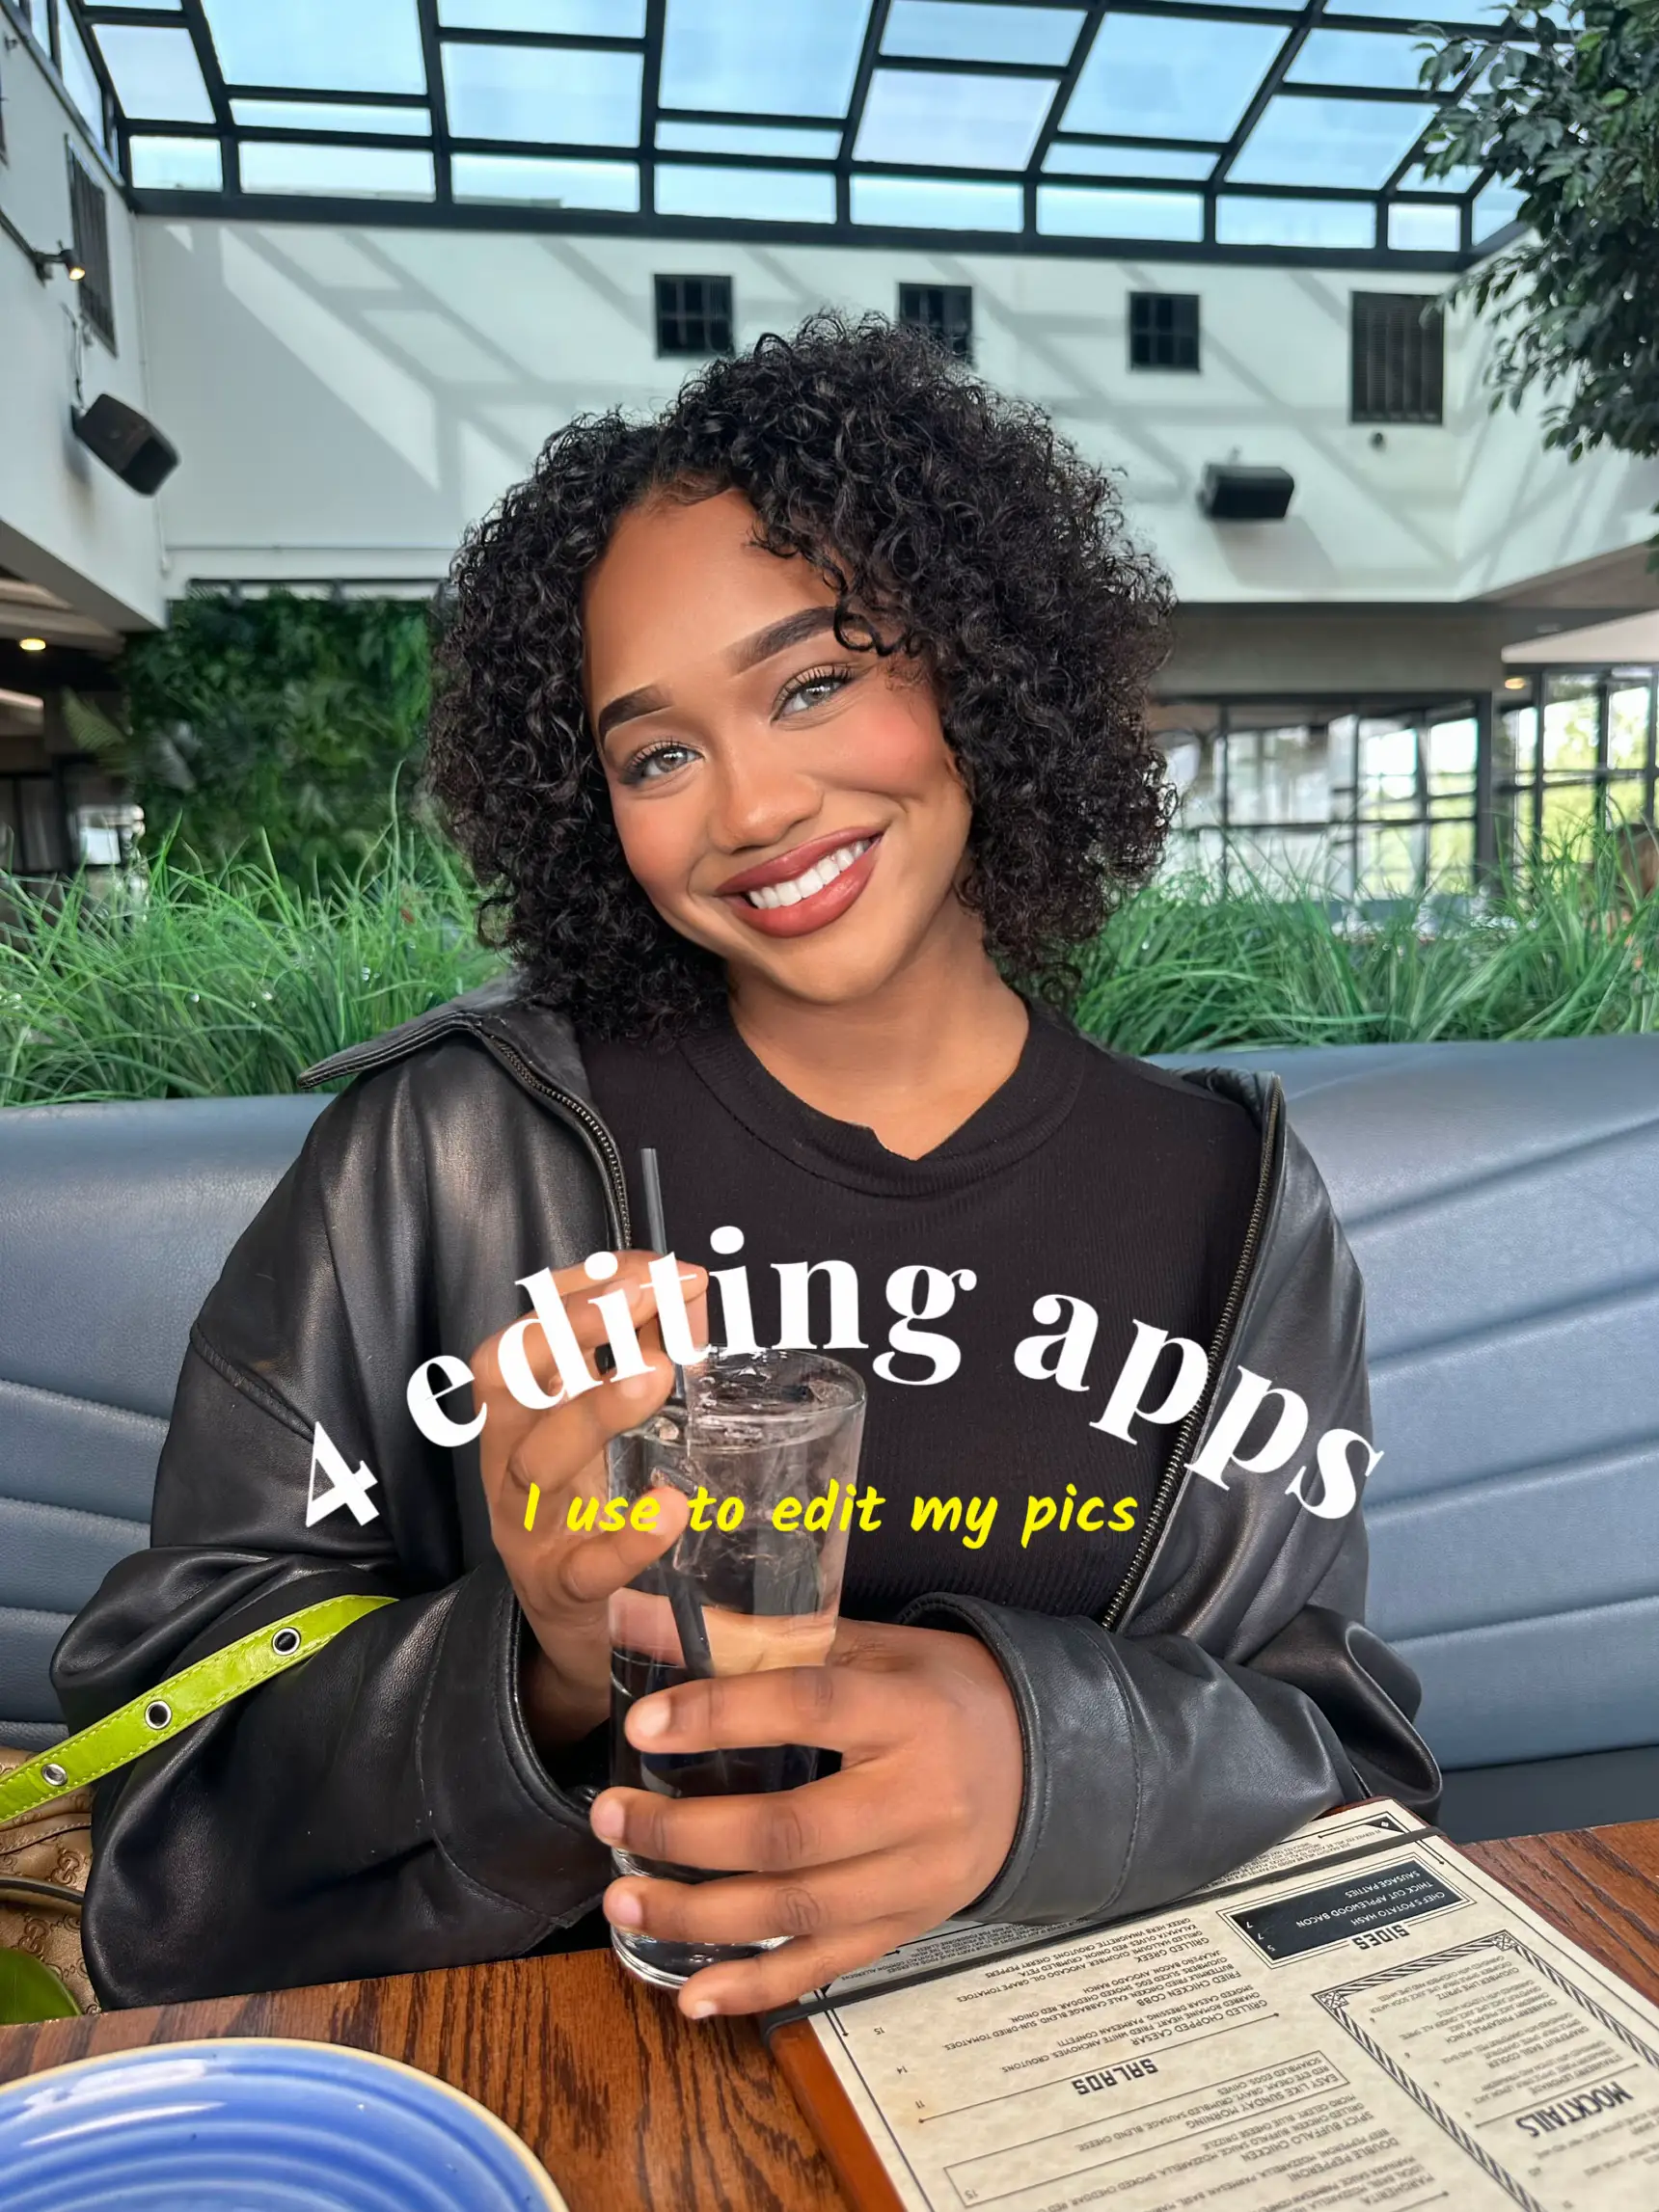 My Go-To editing apps 's images